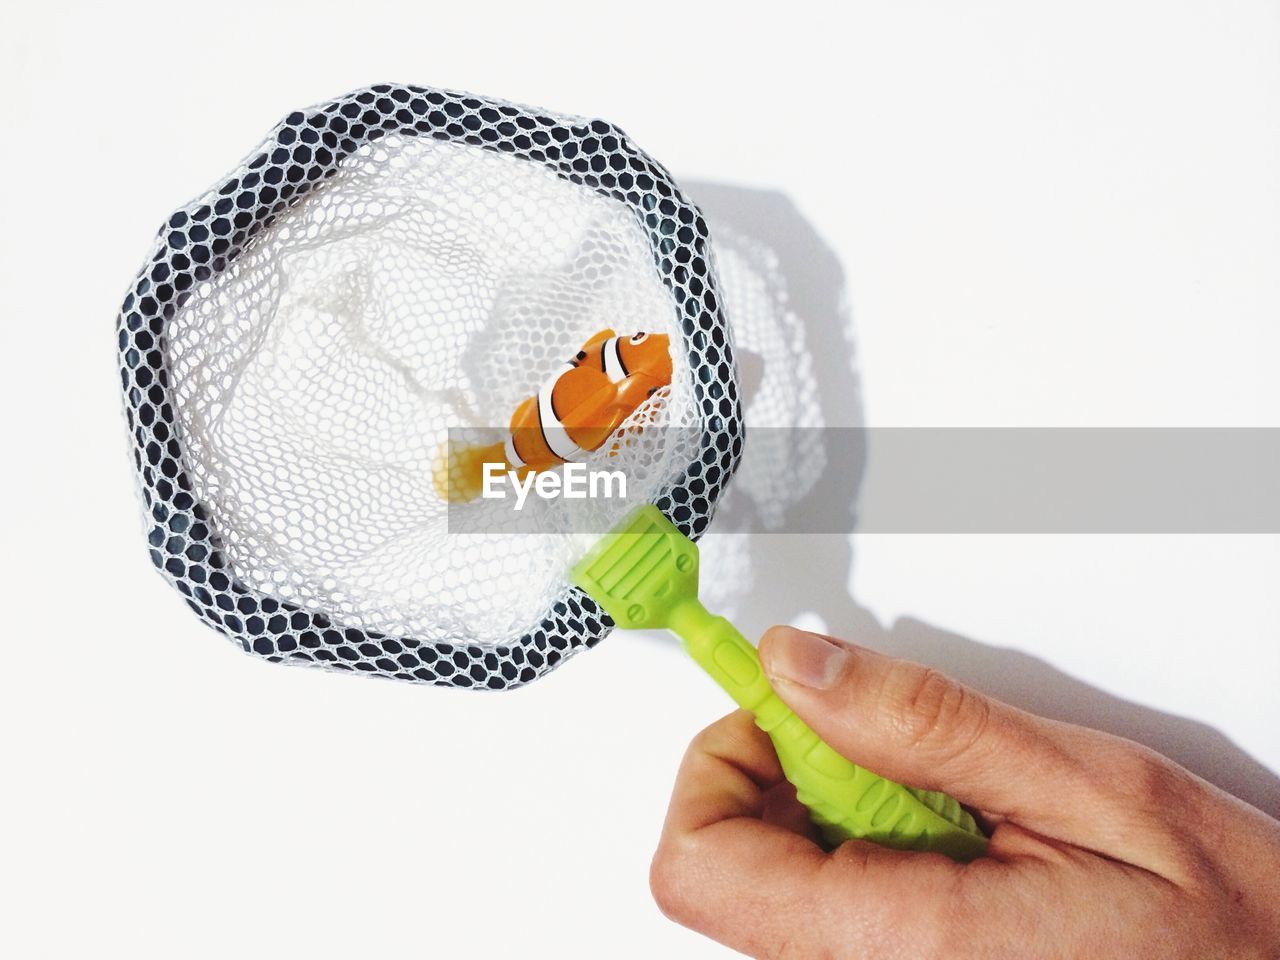 Cropped image of woman holding toy clown fish in net over white background